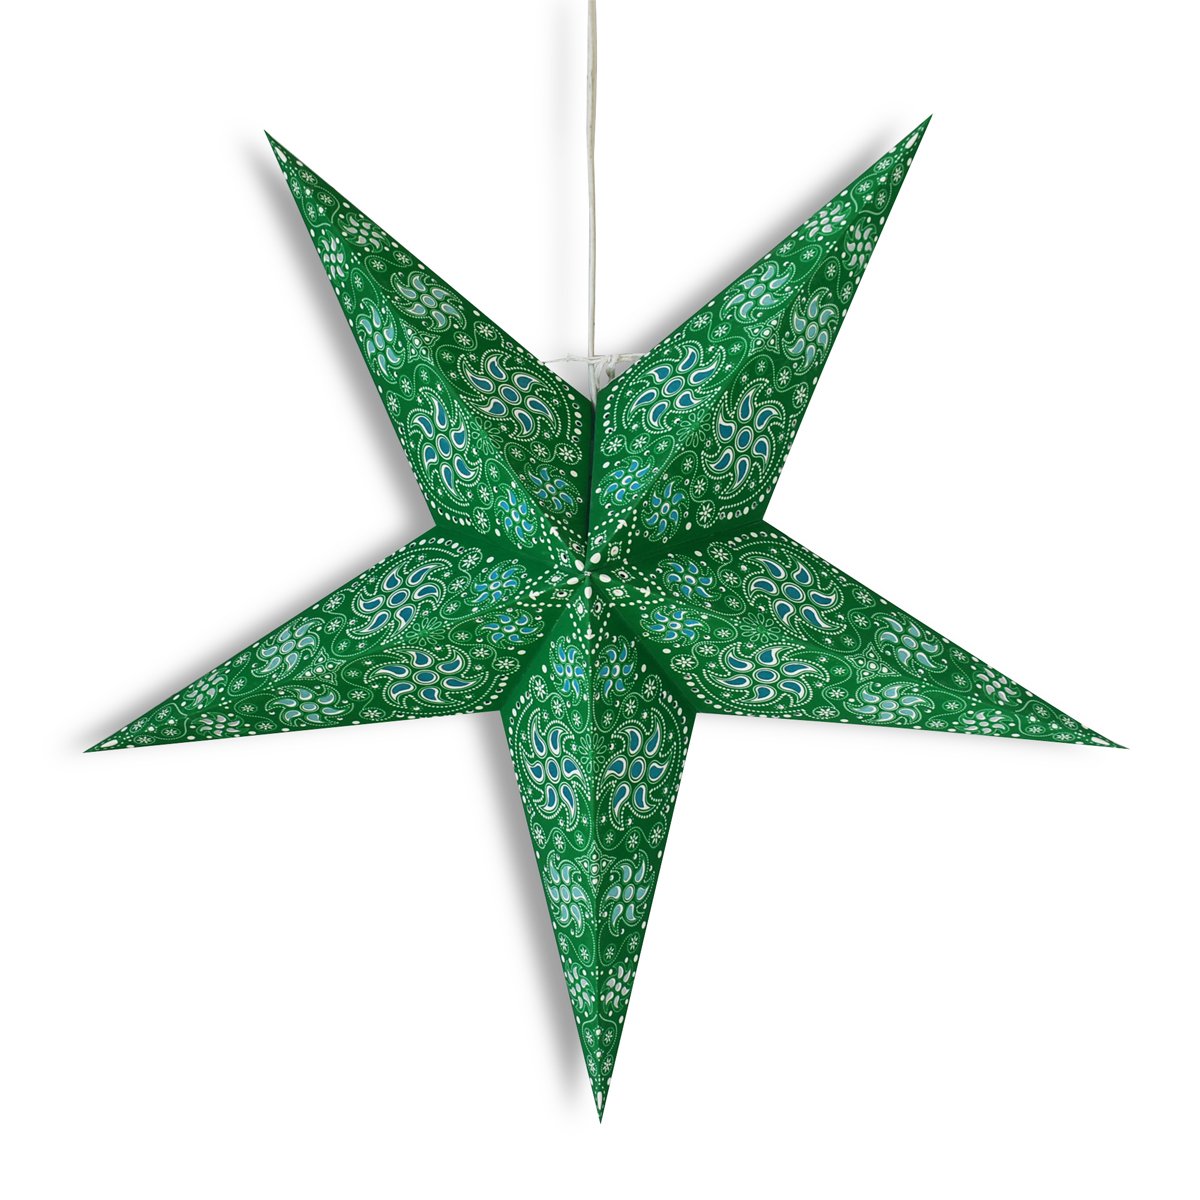 3-PACK + Cord | 24" Green Winds Paper Star Lantern and Lamp Cord Hanging Decoration - AsianImportStore.com - B2B Wholesale Lighting and Decor